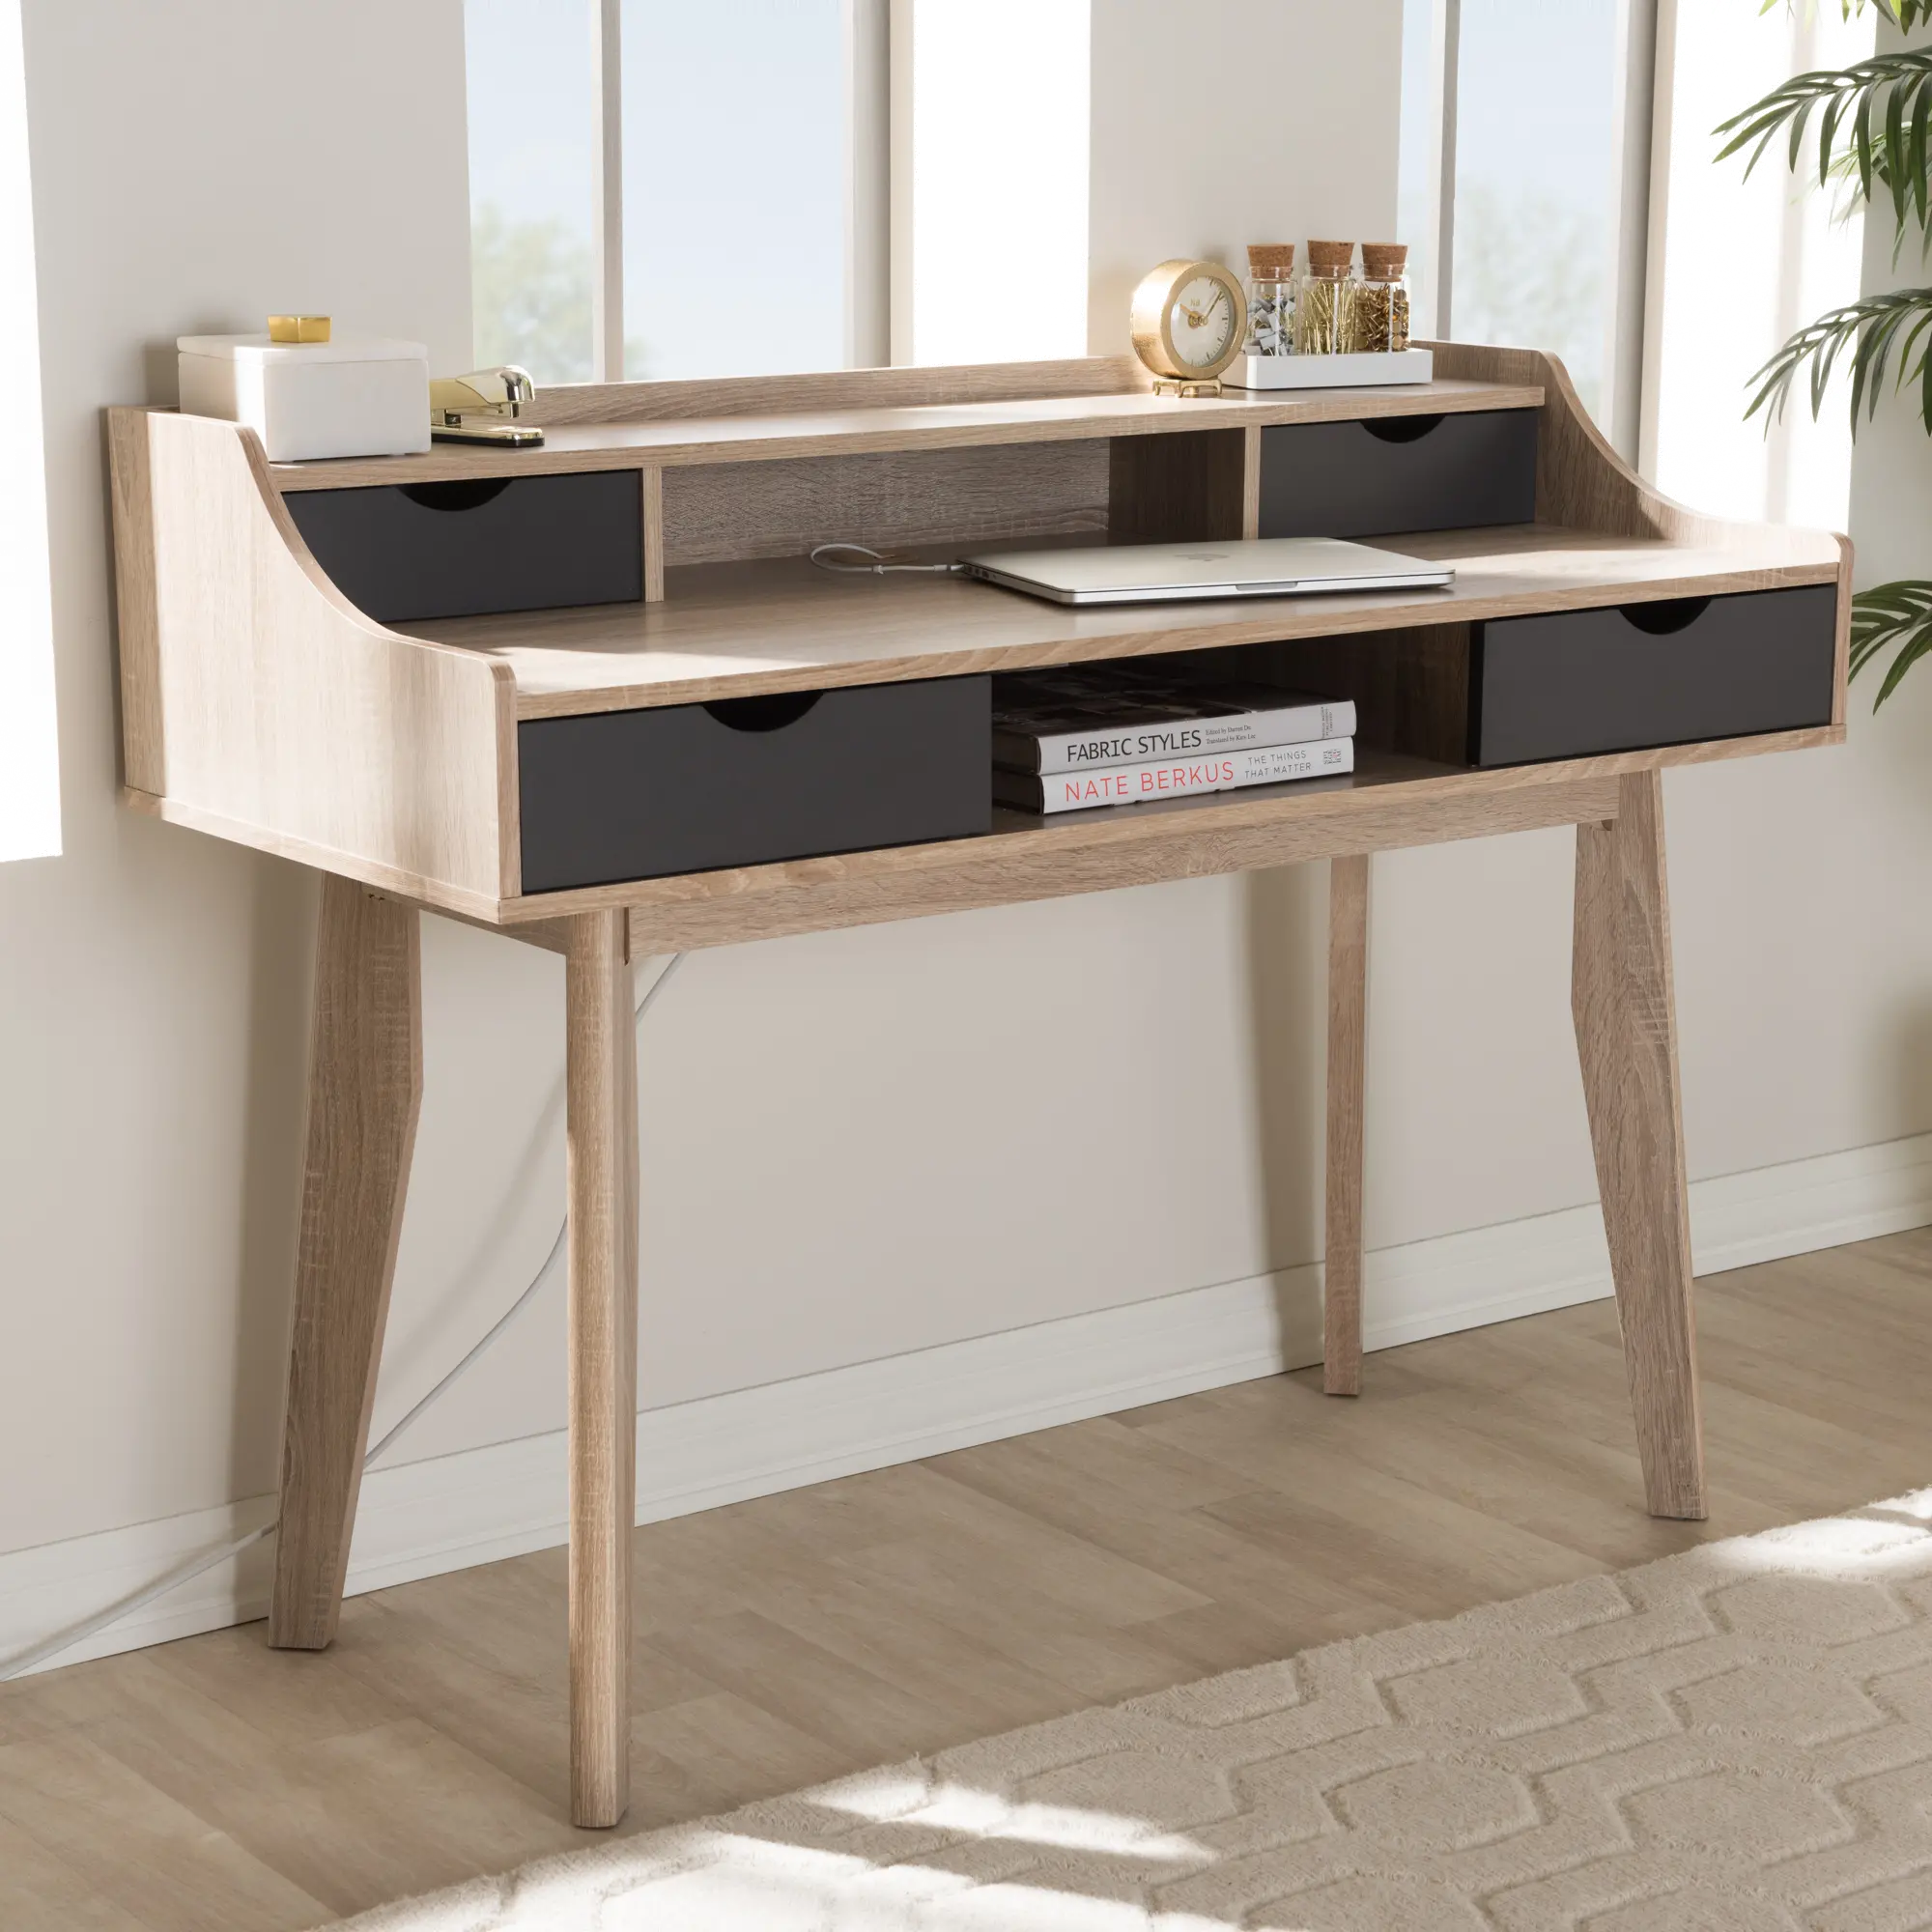 https://static.rcwilley.com/products/111161479/Modern-4-Drawer-Oak-and-Gray-Writing-Desk-rcwilley-image1.webp